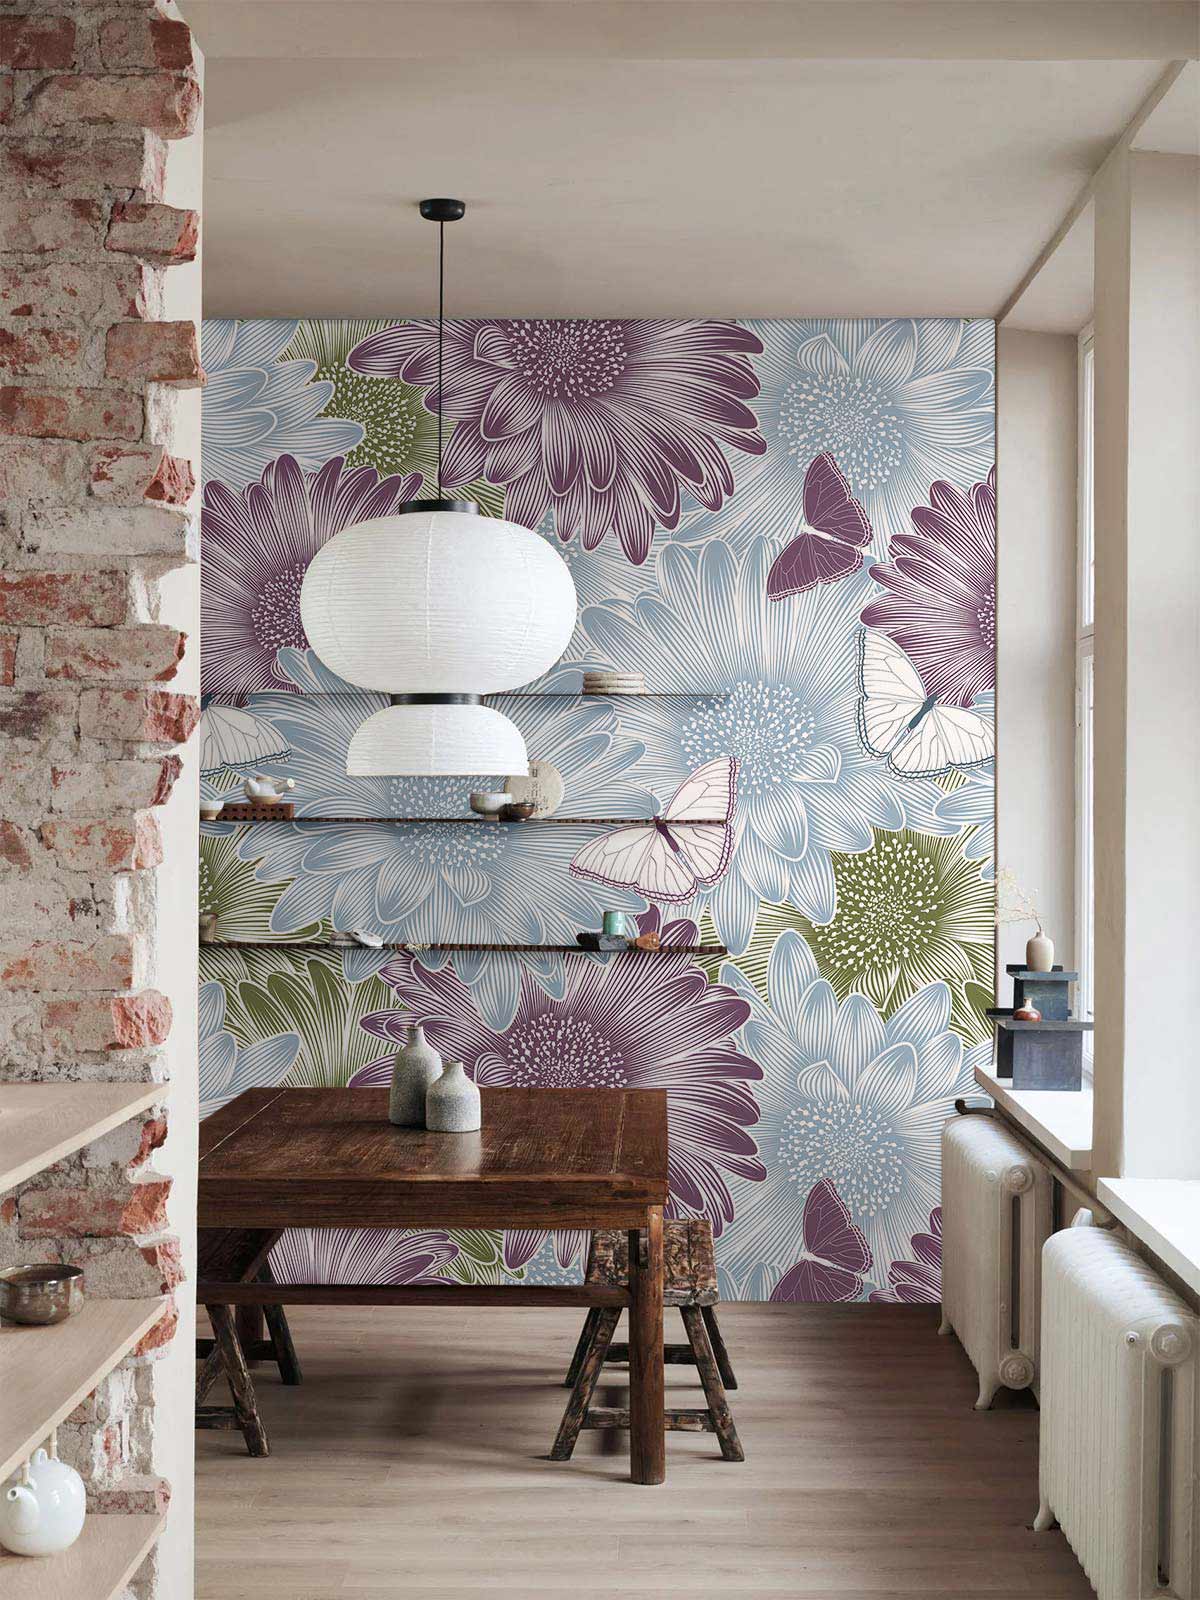 Design of retro wallpaper with a daisy blossom in green, blue, and purple as well as a white butterfly